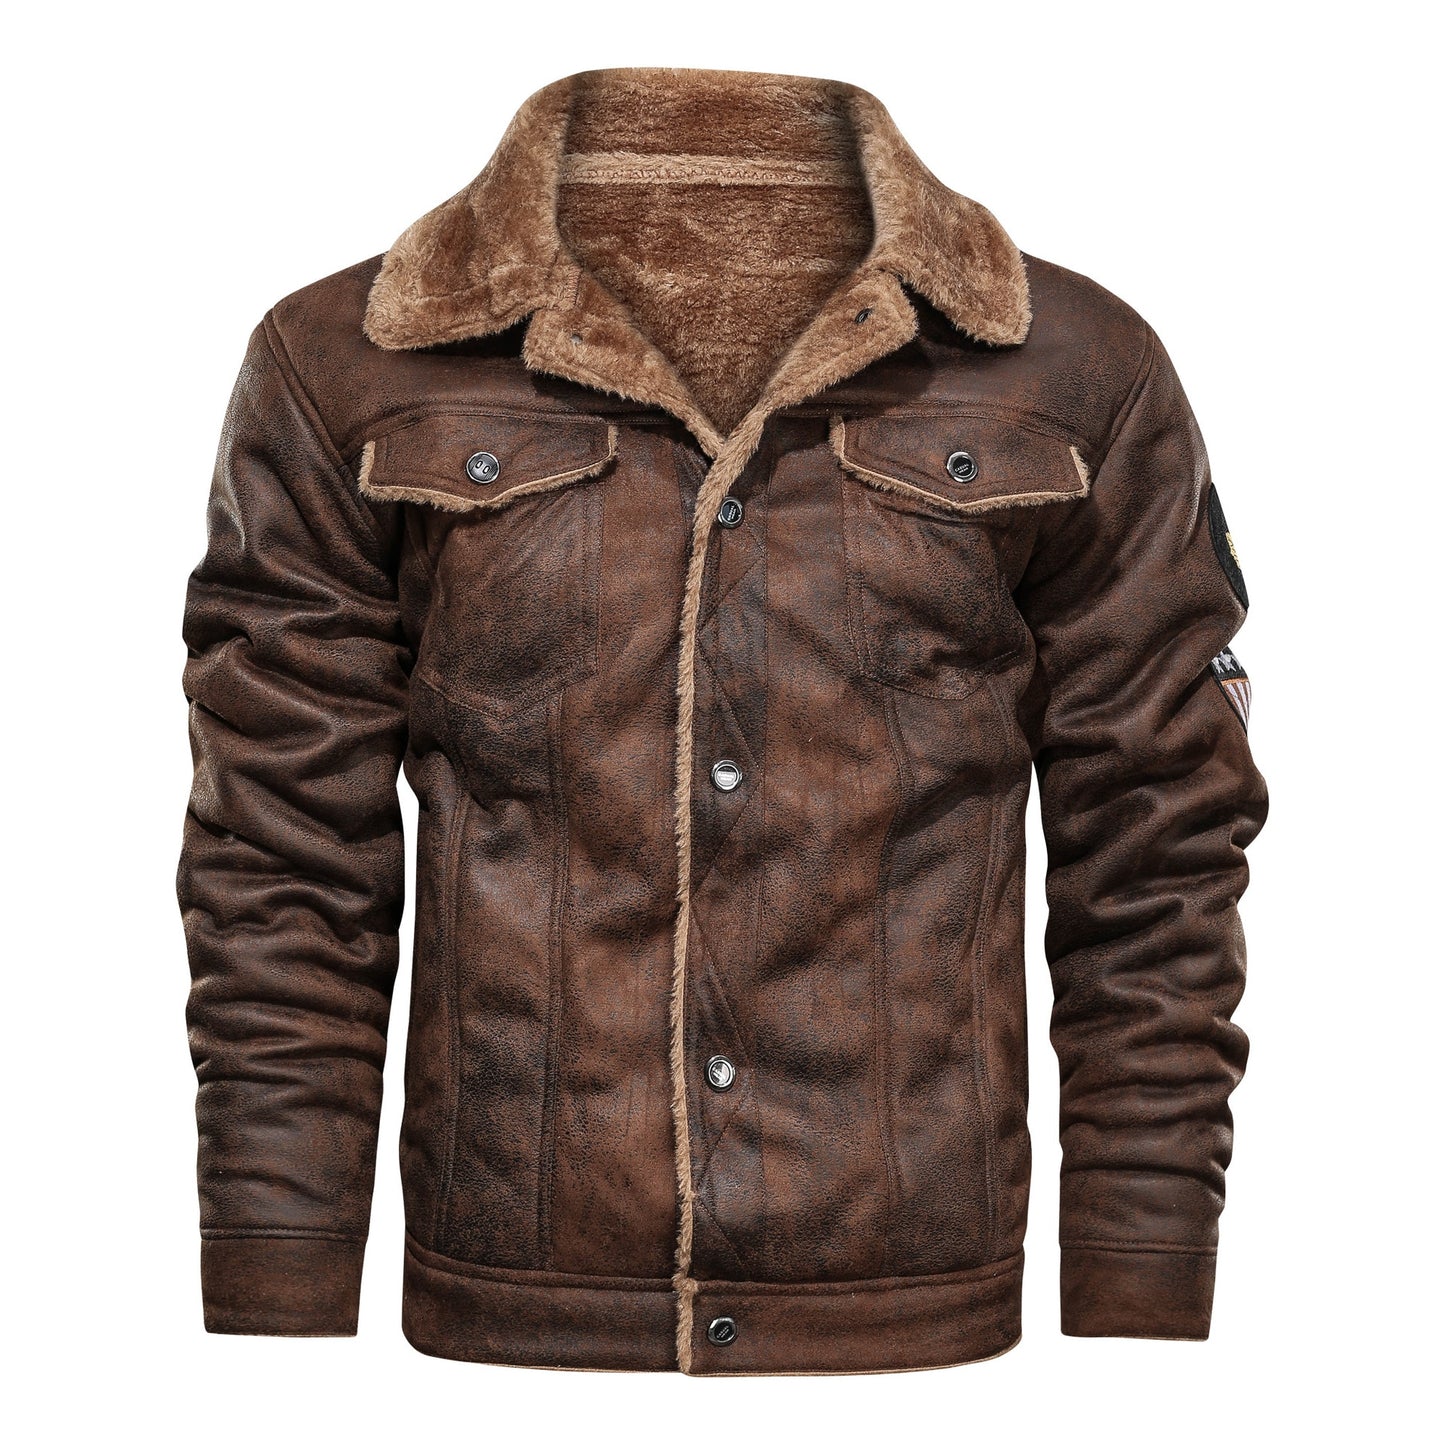 Men's Thick Bomber Faux Leather Jacket With Fleece lining (4 Colors / Options)